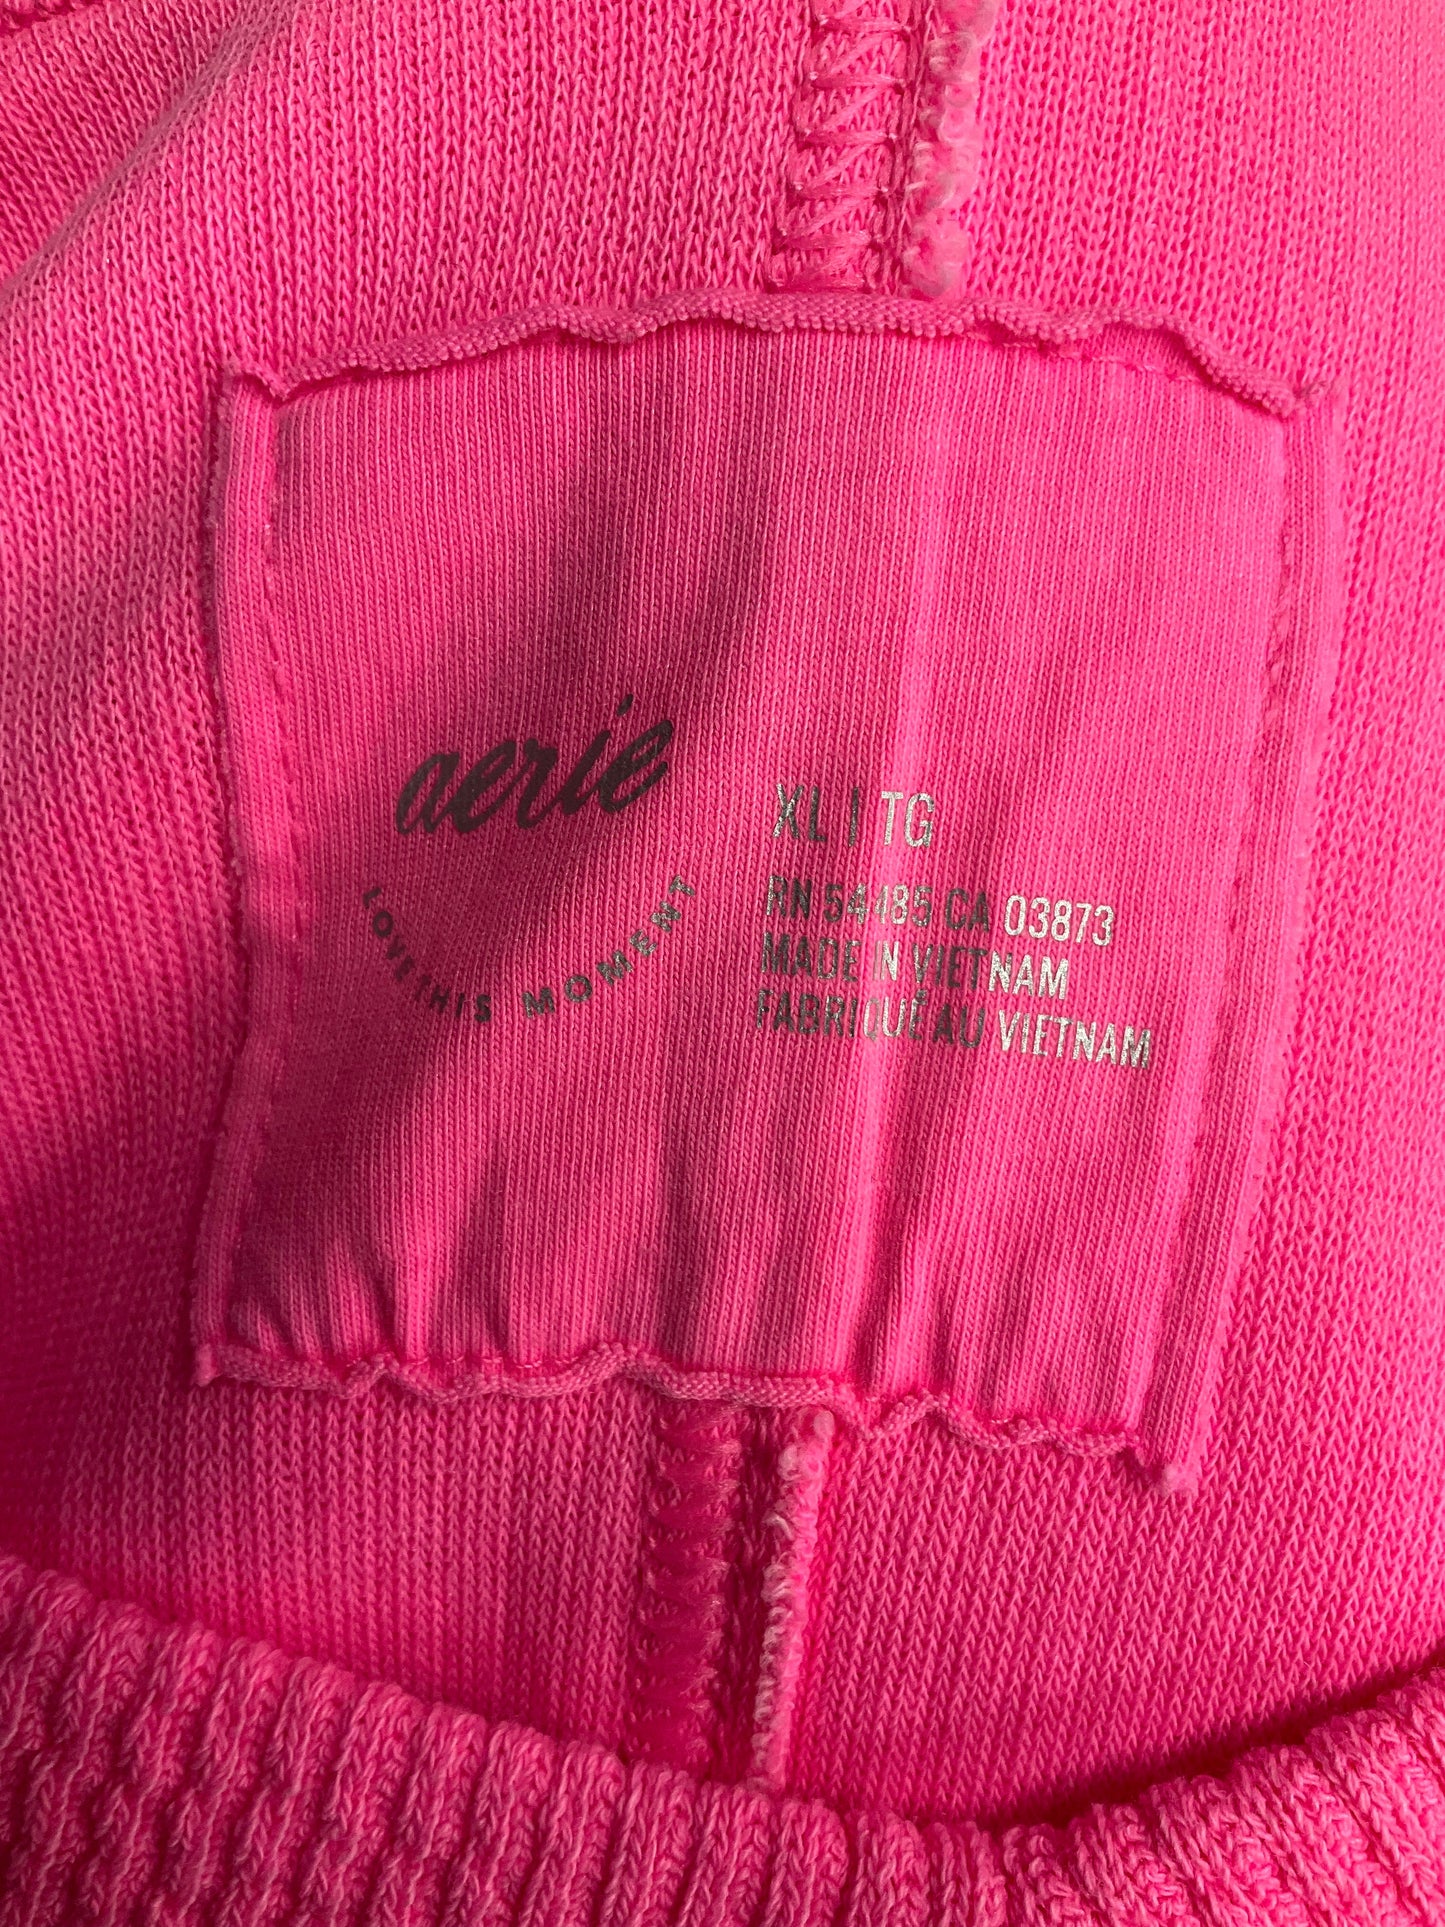 Pink Top Long Sleeve Aerie, Size Xl